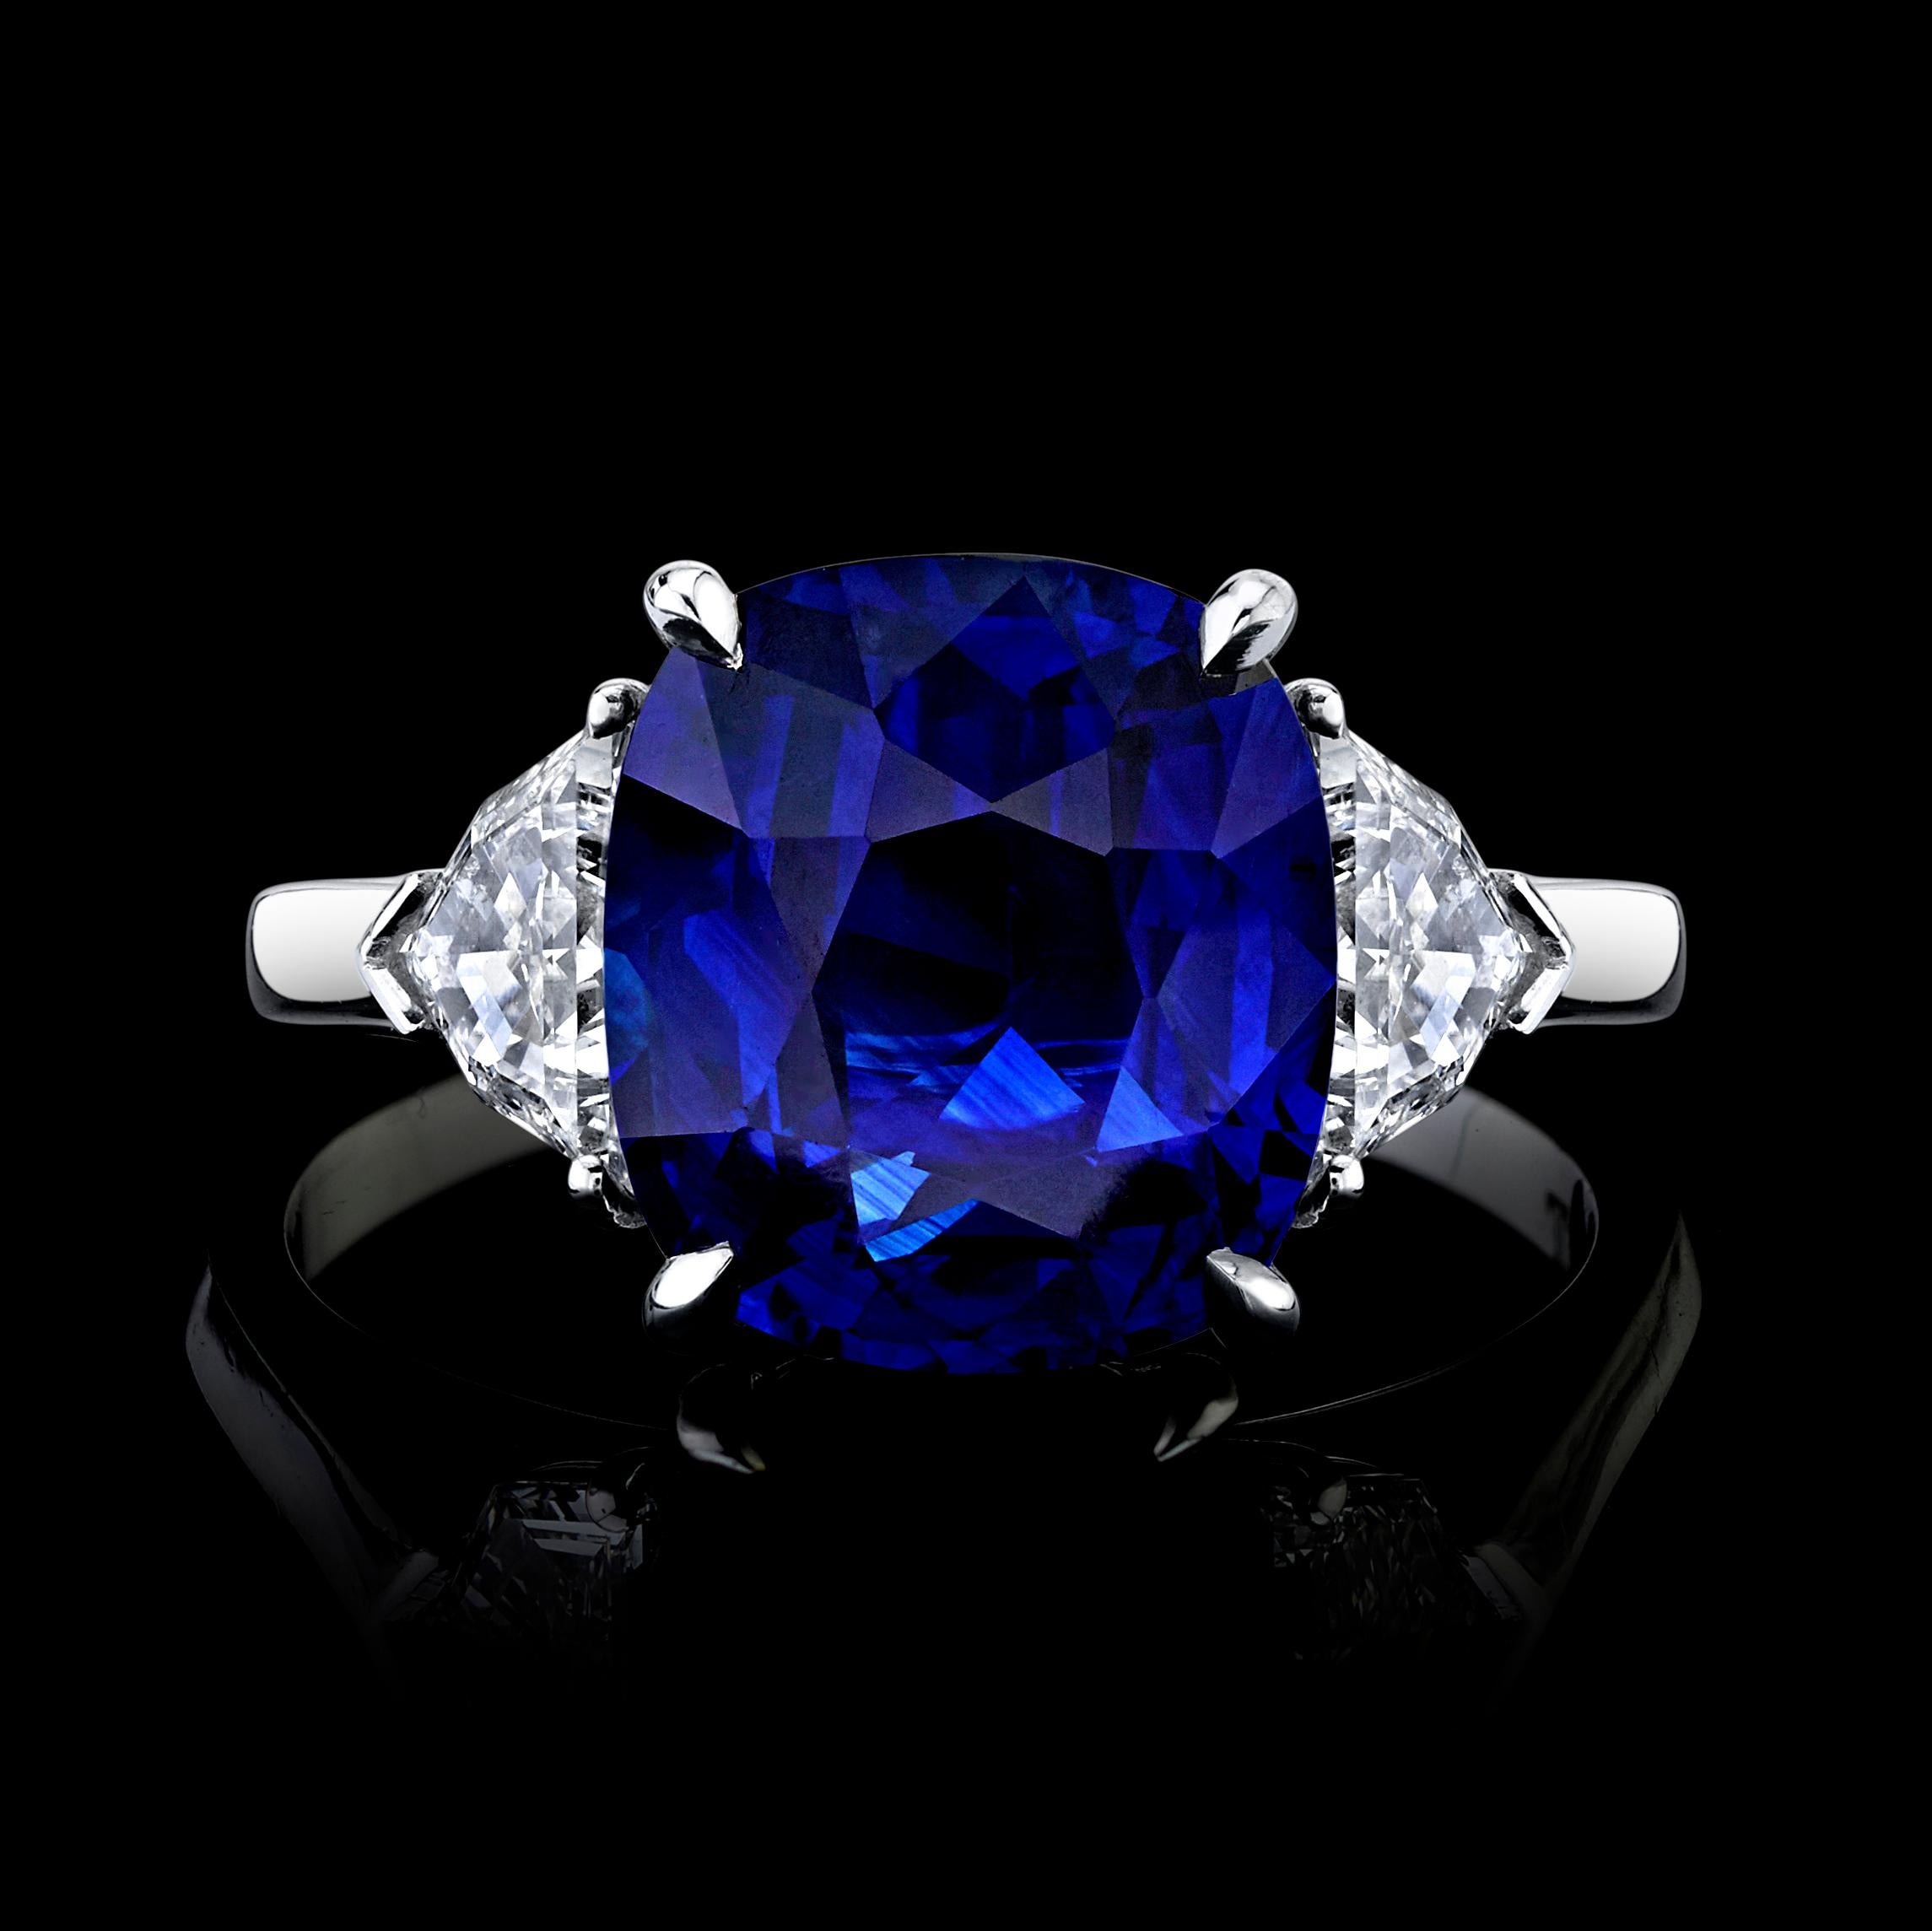 GIA Certified 6.51 Carat Cushion Deep Blue Sapphire and Diamond Ring In New Condition For Sale In Calabasas, CA